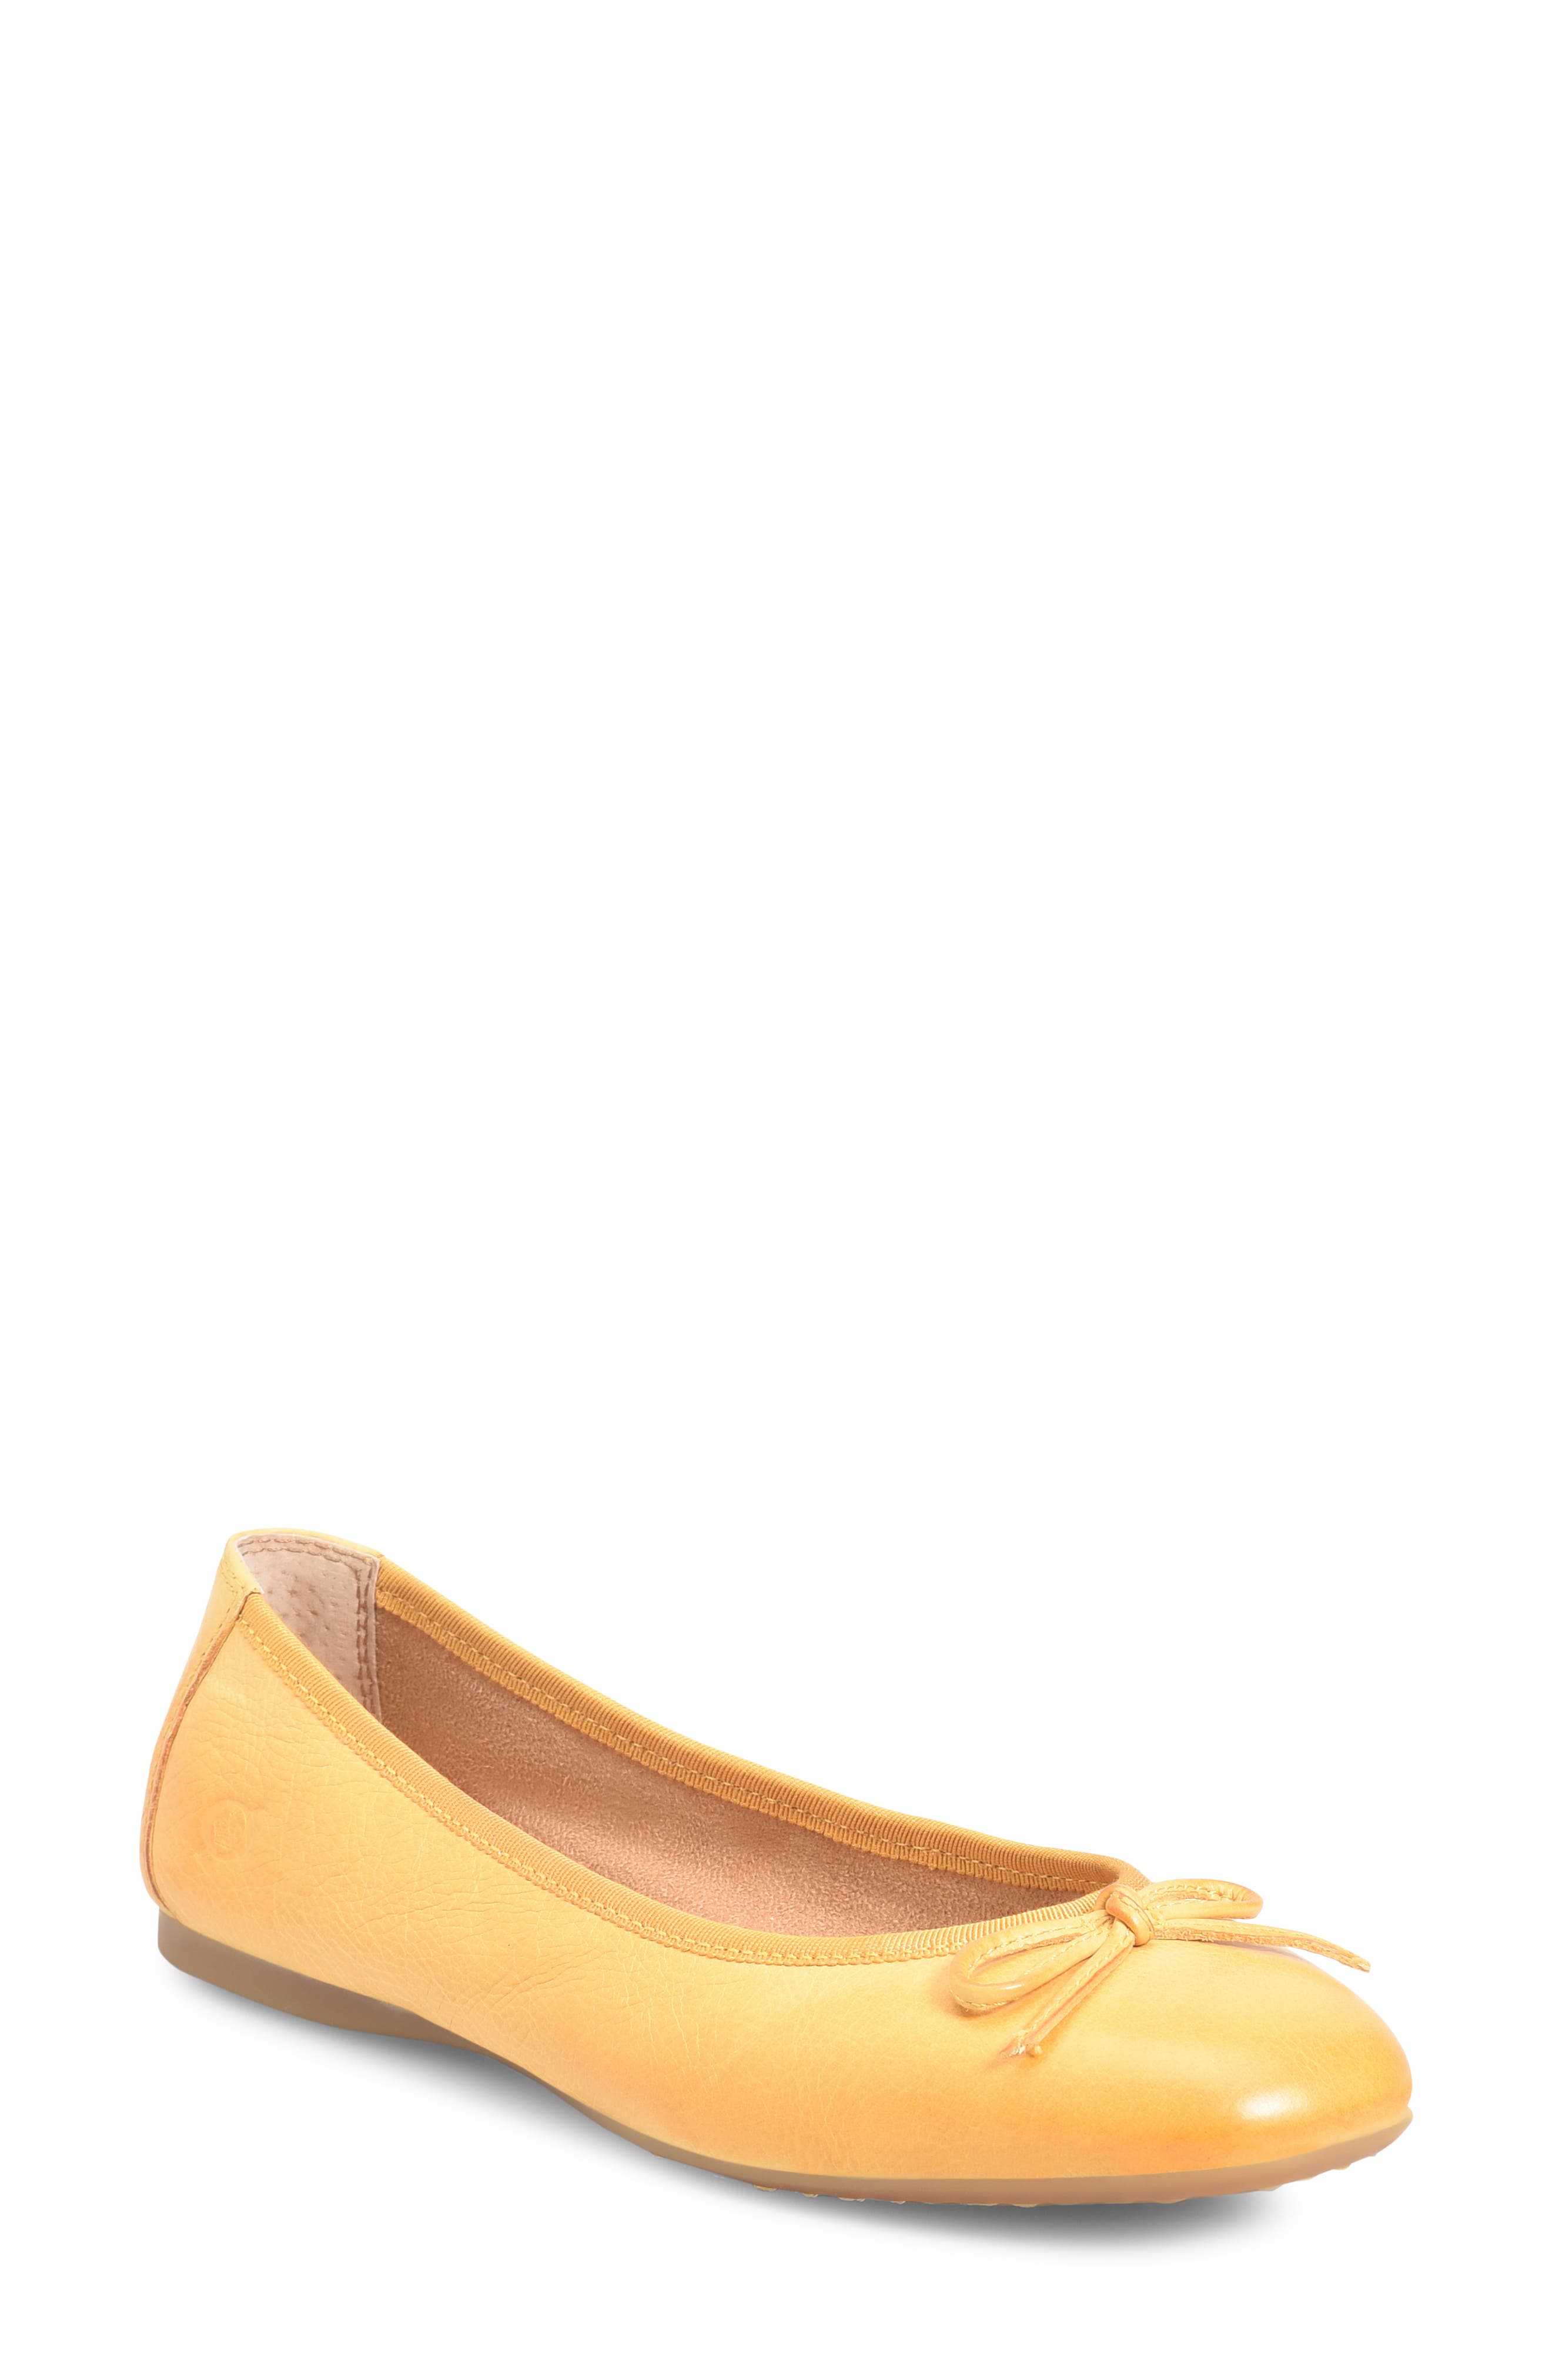 yellow flats with strap